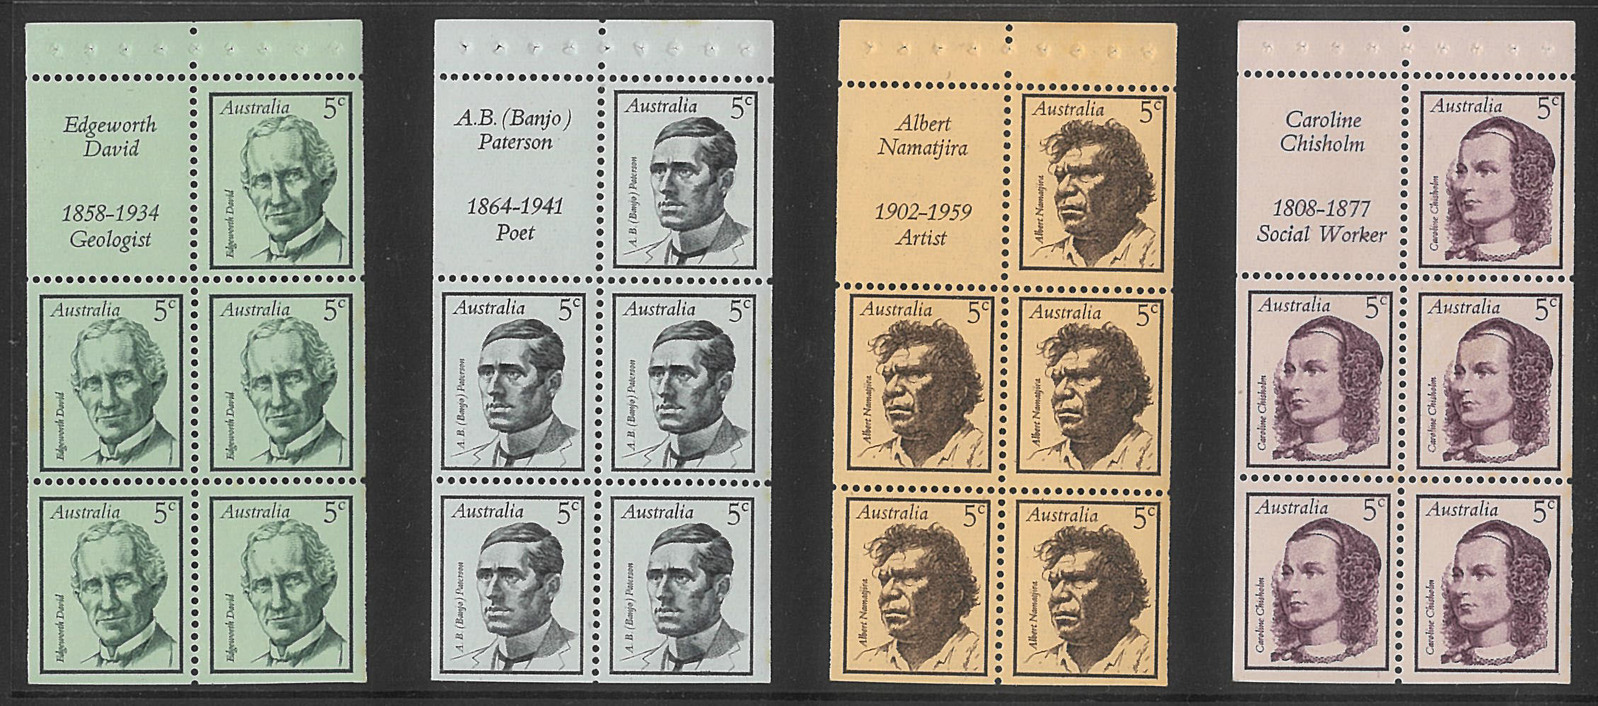 Stamp Dealers in Adelaide